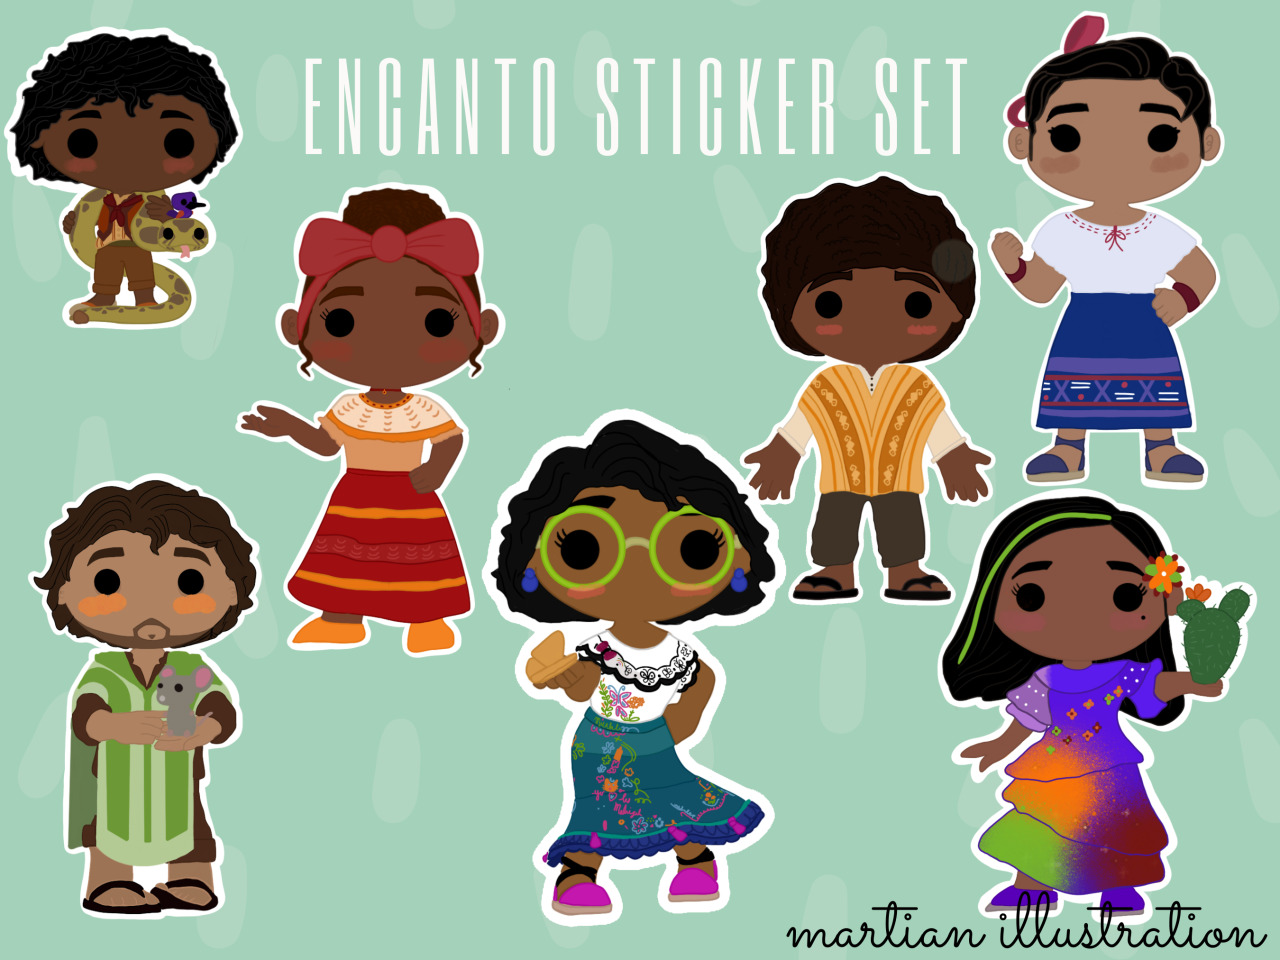 ENCANTO STICKERS by MARTIAN ILLUSTRATION !!hi everyone! i created this encanto sticker set! i’m a small artist who makes bookish (and sometimes musician) stickers & bookmarks! it would mean the world if you could reblog/like this! thank you so much for reading this far!!available in a pack or single stickers$1 (b-grade), $3 (single sticker), $15 (set of 7)all prices are in CAD (so much cheaper in USD!)LINK HERE #disney merch#disney stickers#encanto disney#disney encato#madrigal family#mirabel madrigal#luisa madrigal#isabella madrigal#bruno madrigal#camilo madirgal#dolores madrigal#Madrigal encanto#Encanto#encanto stickers#encanto merch